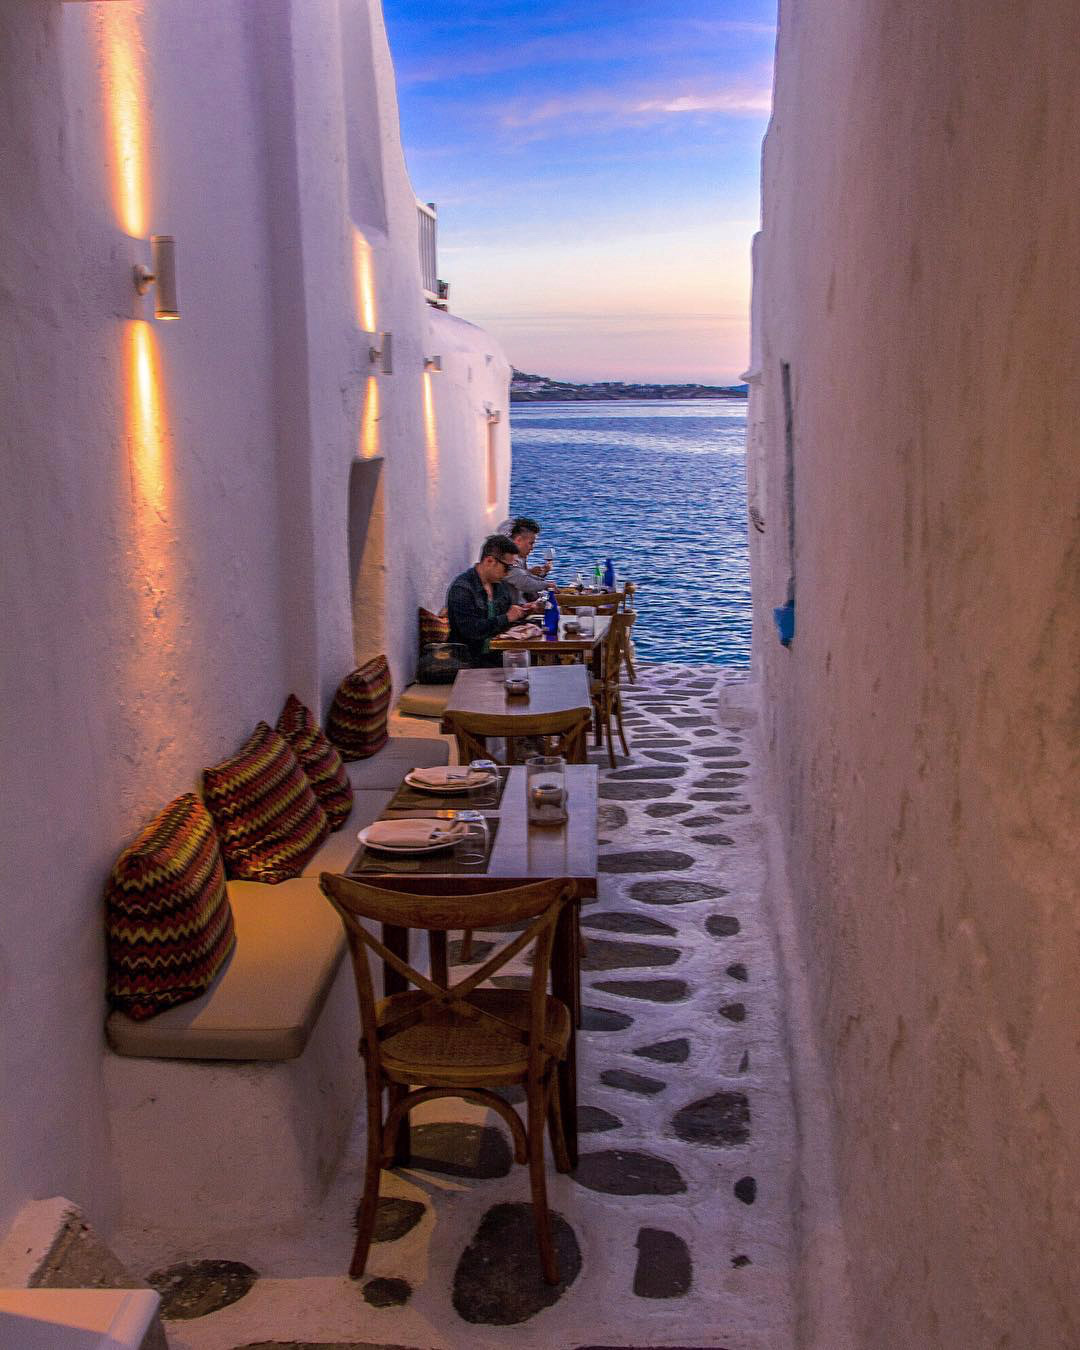 The essential Mykonos travel guide